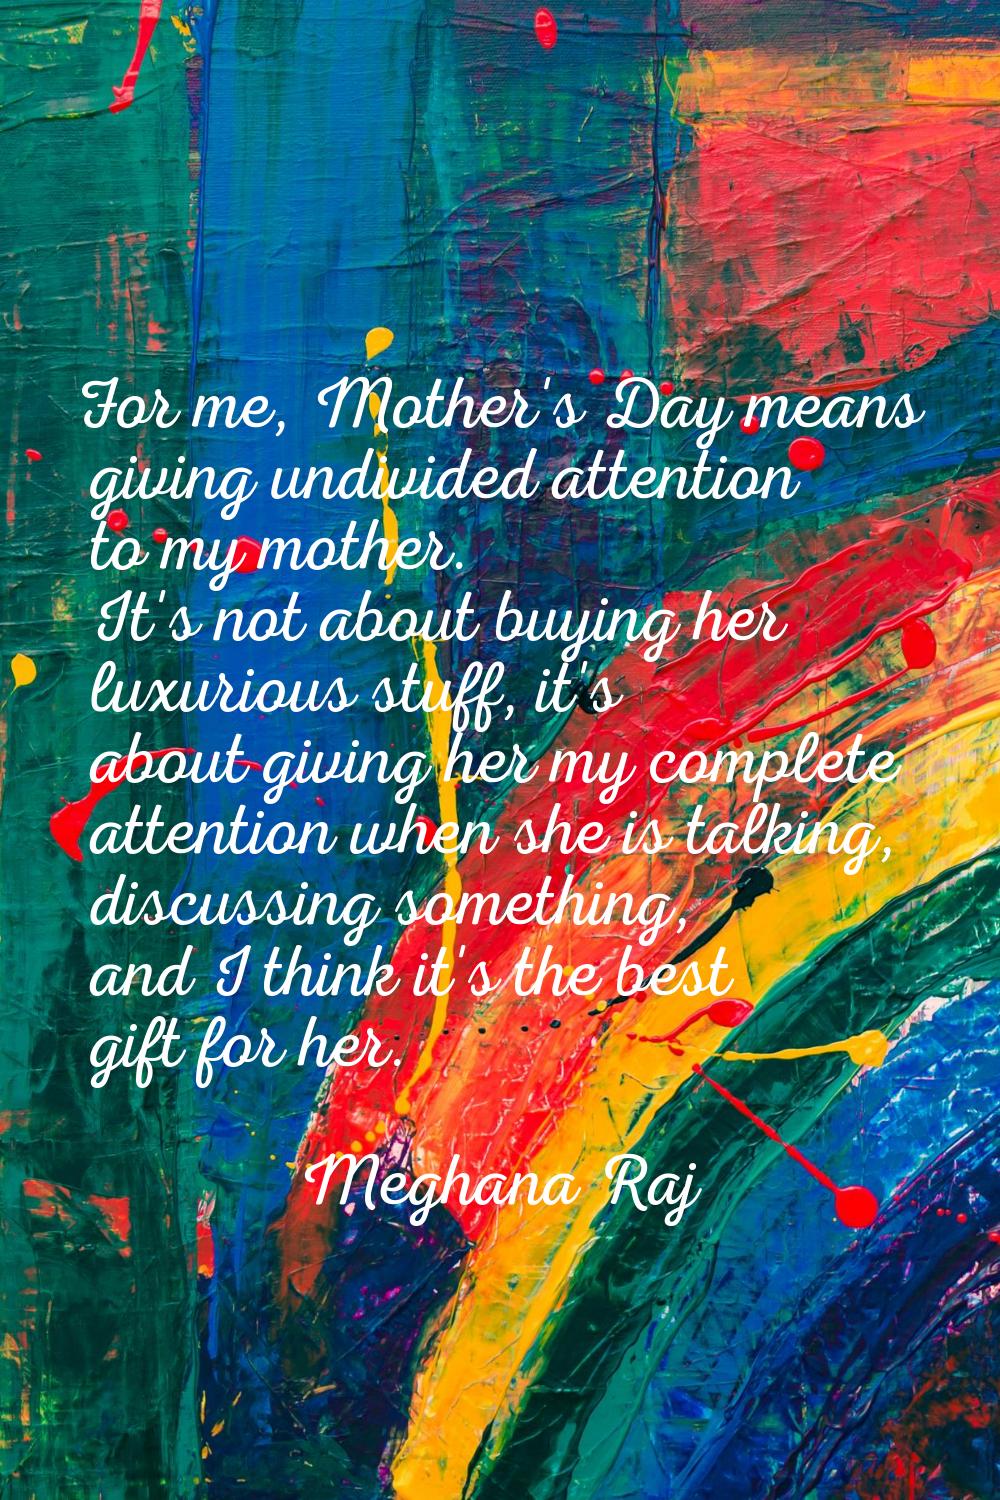 For me, Mother's Day means giving undivided attention to my mother. It's not about buying her luxur